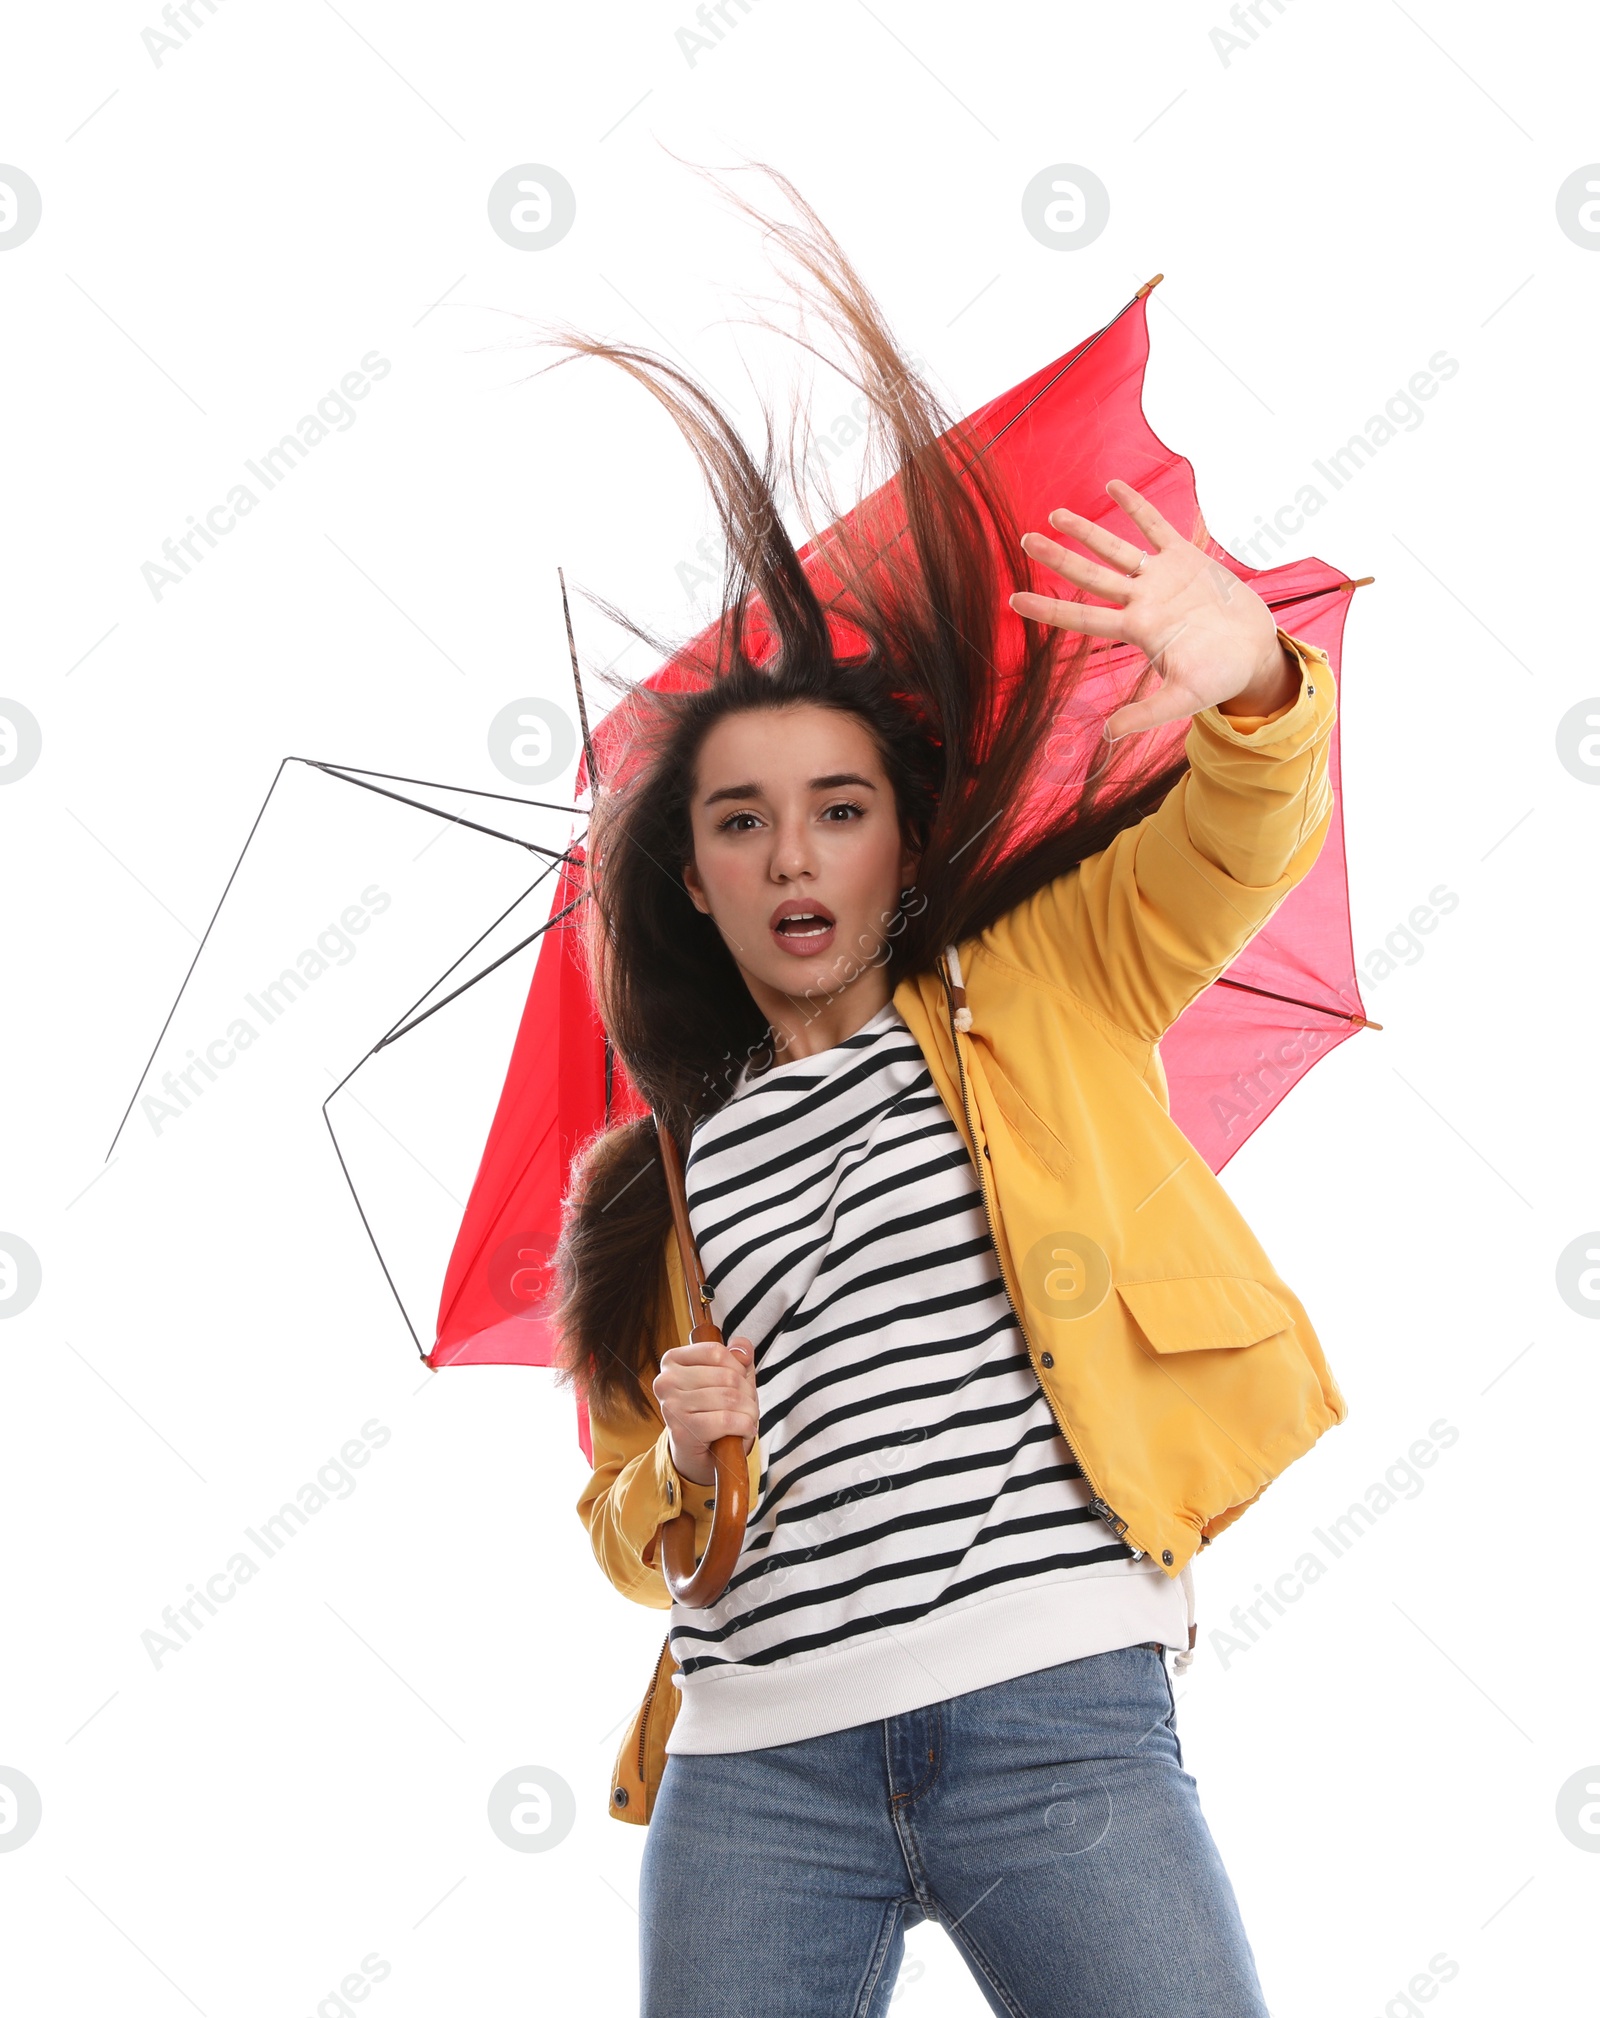 Photo of Emotional woman with umbrella caught in gust of wind on white background